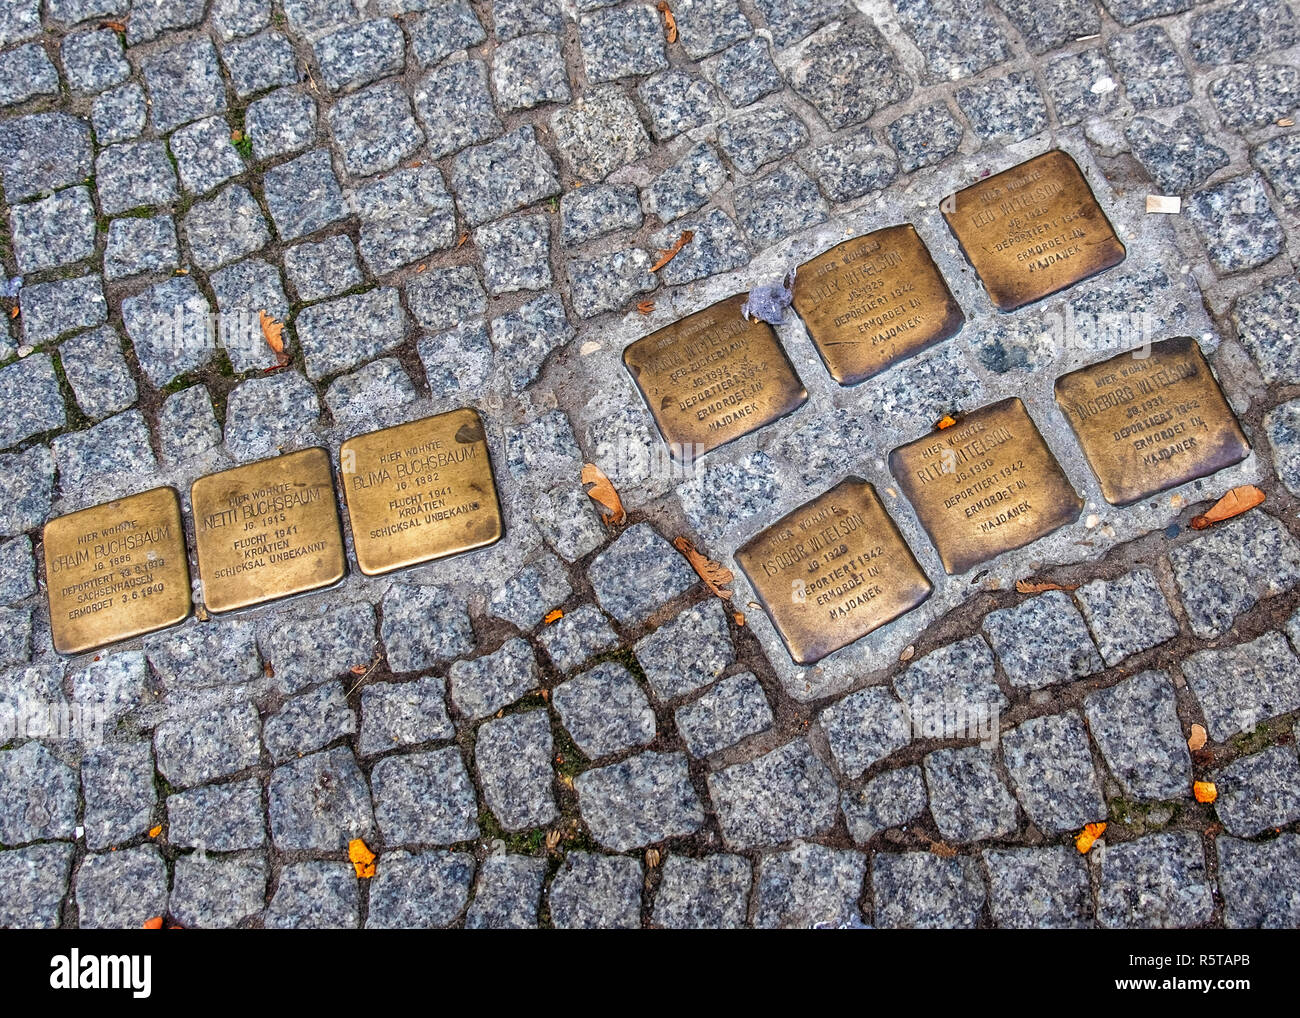 Berlin,Mitte. Stolpersteine, Stumbling block memorials in pavement remember victims of the Nazis who lived at 19 Almstadtstasse Stock Photo